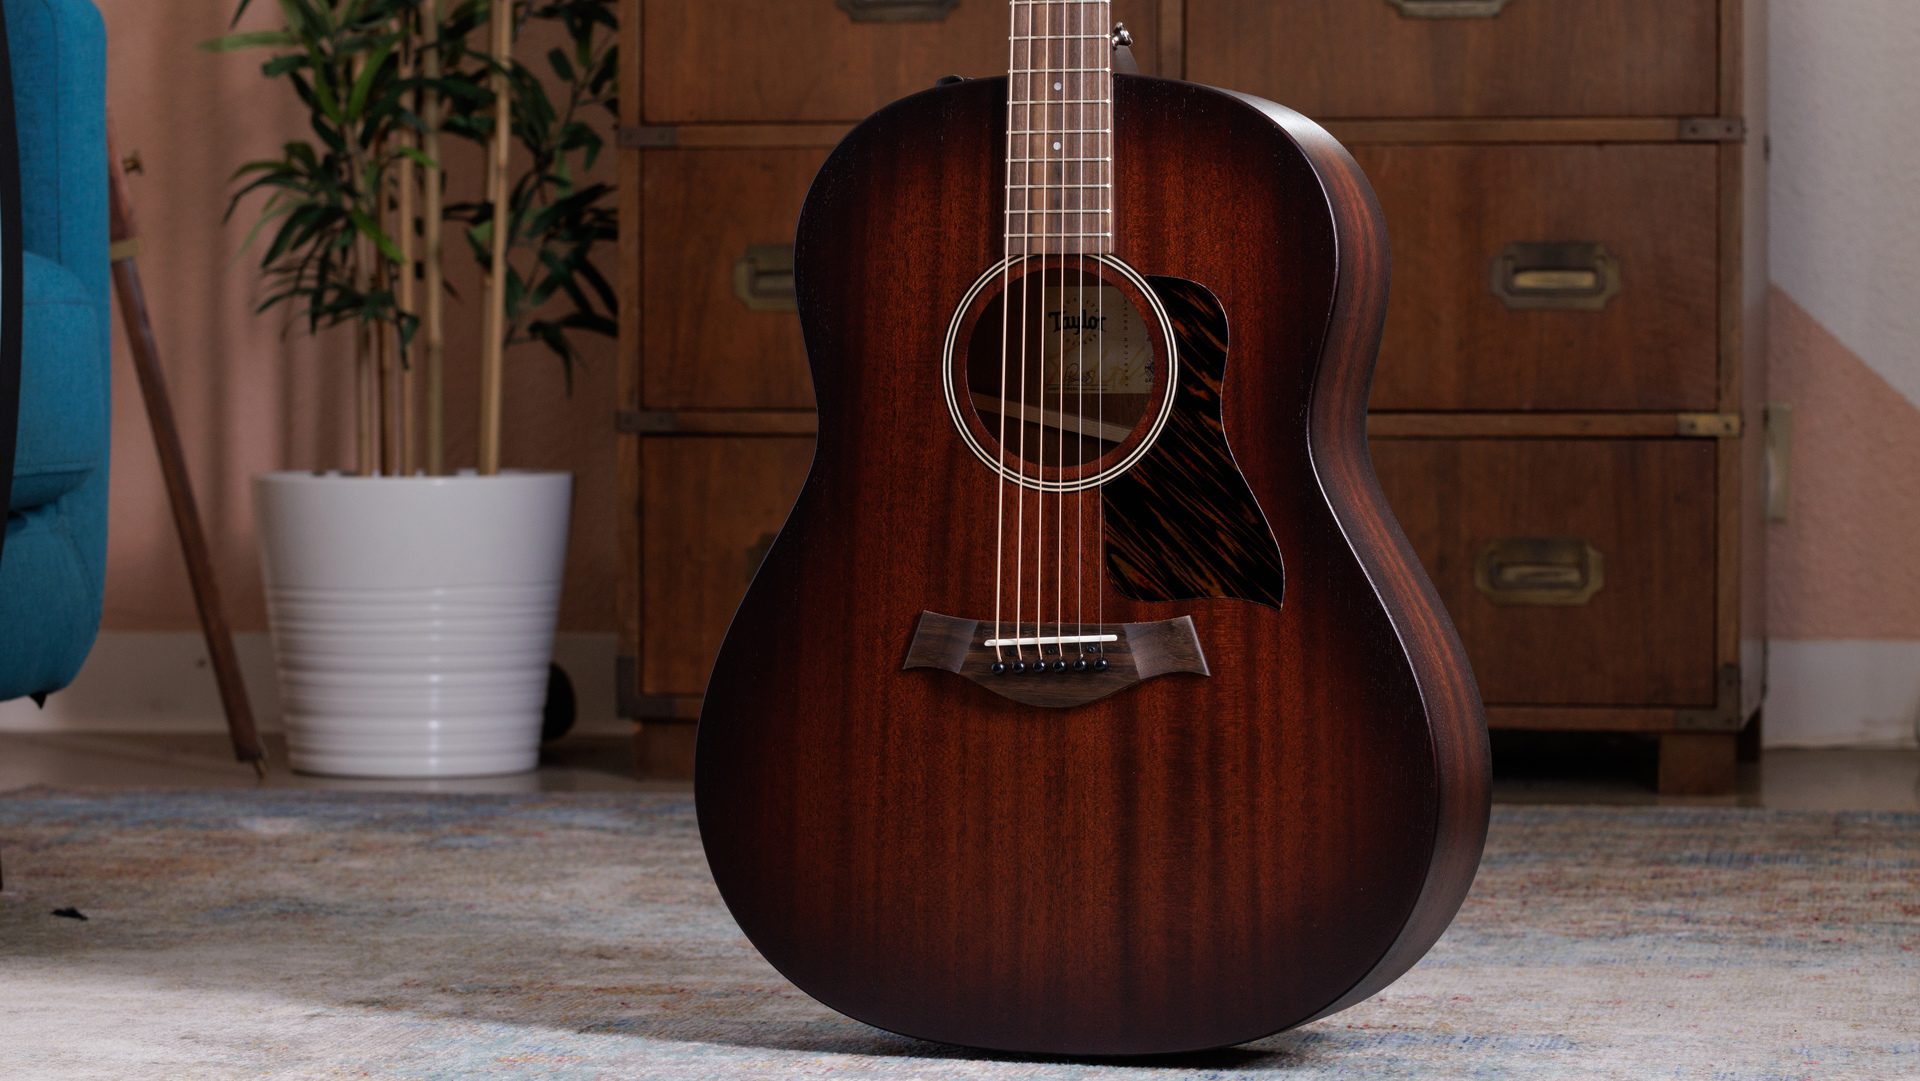 Image of American Dream Series AD27e acoustic-electric guitar with edgeburst finish standing upright in a living room environment